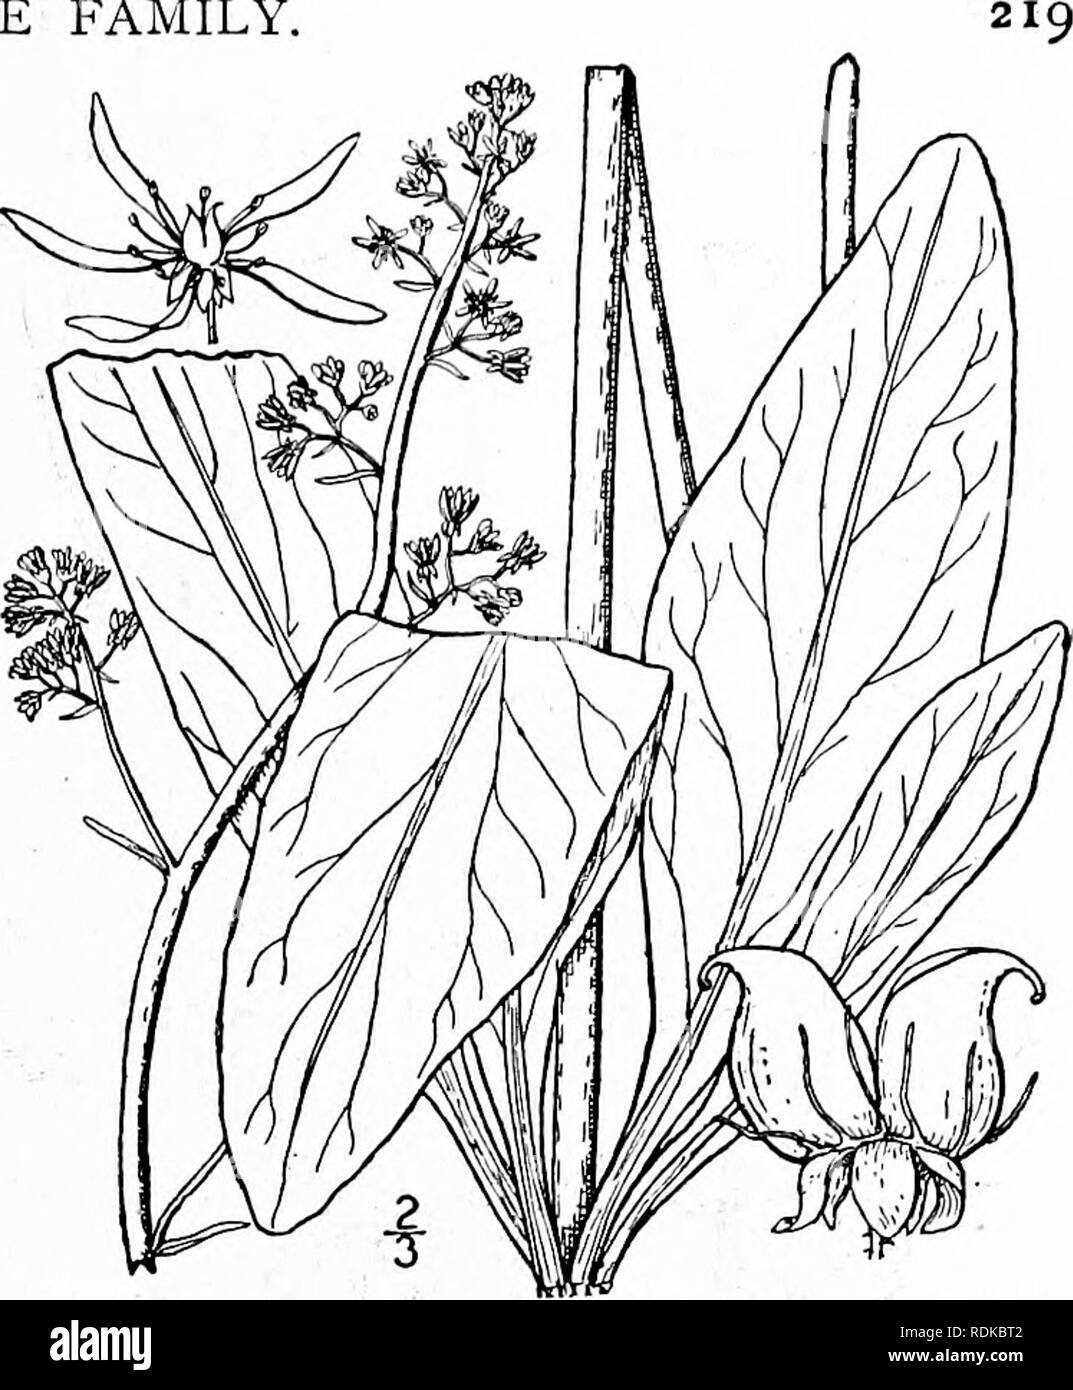 . An illustrated flora of the northern United States, Canada and the British possessions, from Newfoundland to the parallel of the southern boundary of Virginia, and from the Atlantic Ocean westward to the 102d meridian. Botany; Botany. 5. Micranthes micranthidifolia (Haw.) SmalL Lettuce Saxifrage. Fig. 2160. Rohertsonia micranthidifolia Haw. Syn. PI. Succ. 322. 1812. Saxifraga erosa Pursh, FI. Am. Sept. 311. 1814. 5. micranthidifolia B.S.P. Prel. Cat. N. Y. 17. 1888. M. micranthidifolia Small, Fl. SE. U. S. 501. 1903. Scape rather slender, more or less viscid, i°-3° high, bracted above. Leave Stock Photo